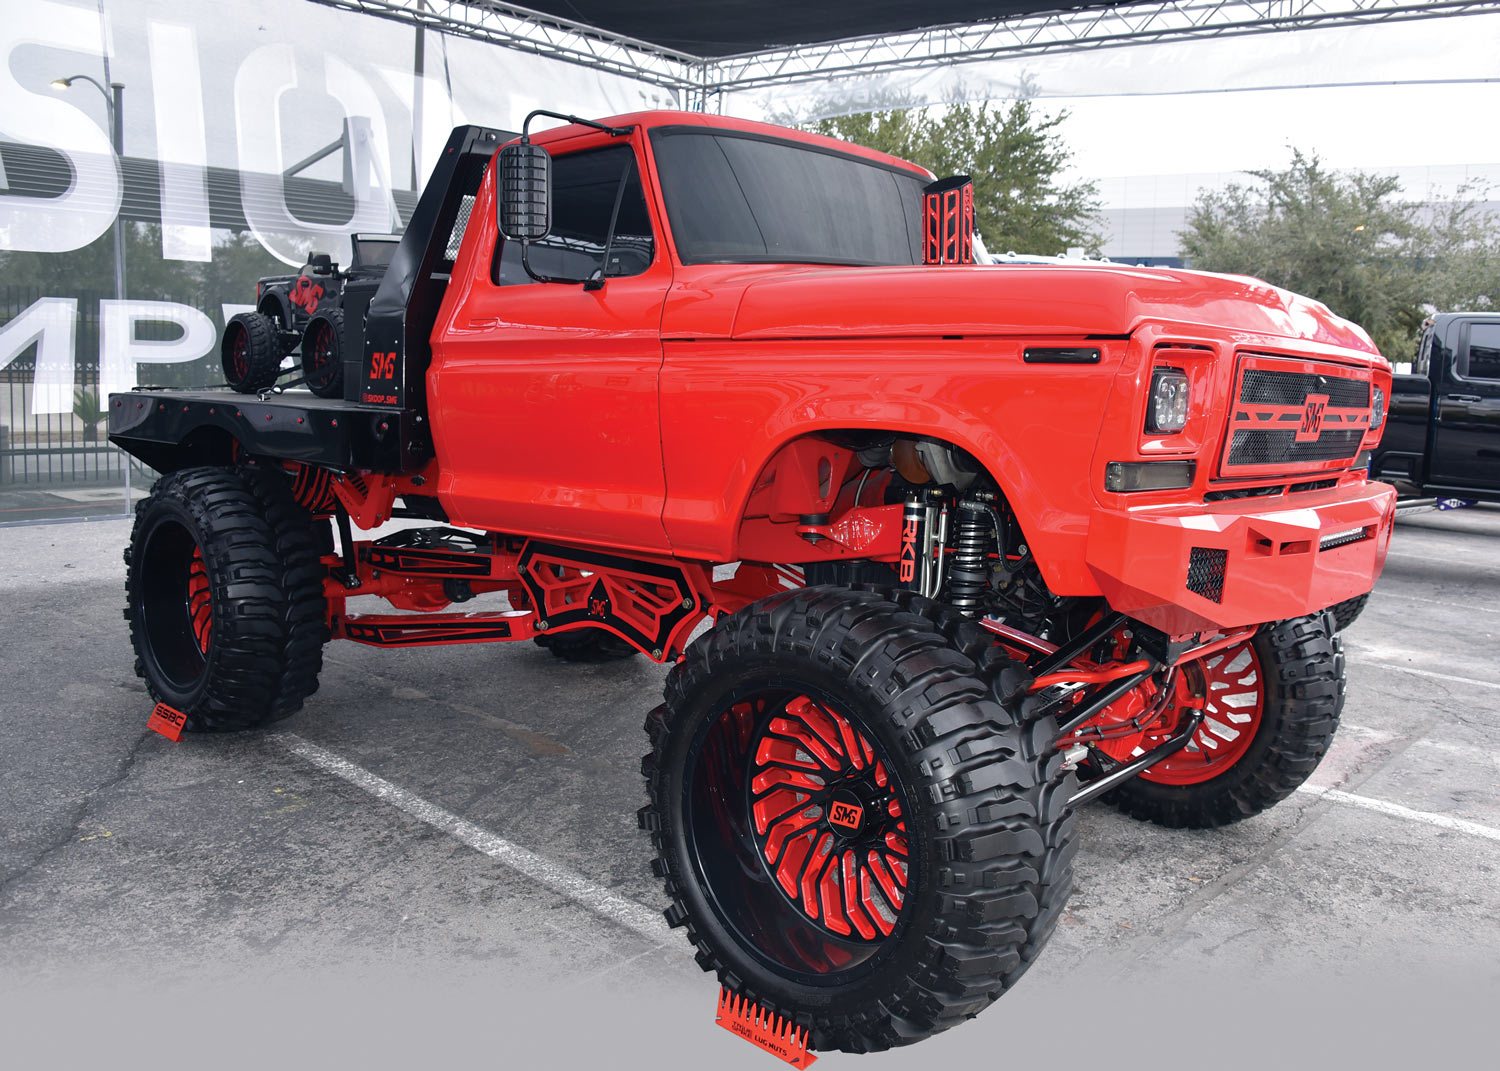 red lifted truck with a quad on the back